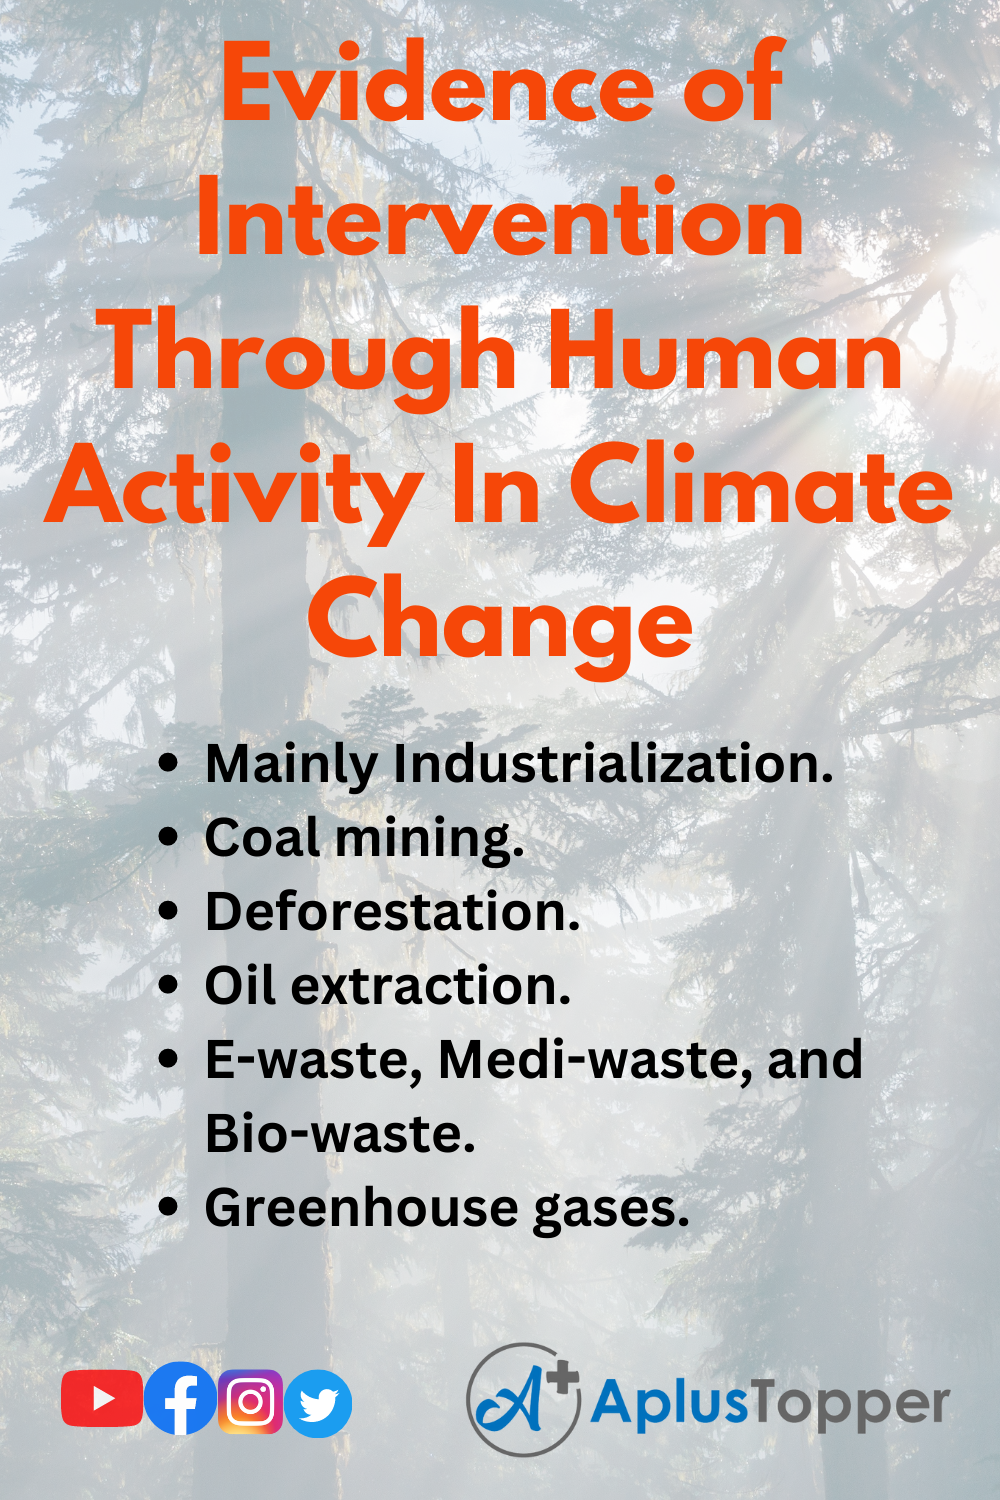 Evidence of Intervention Through Human Activity In Climate Change